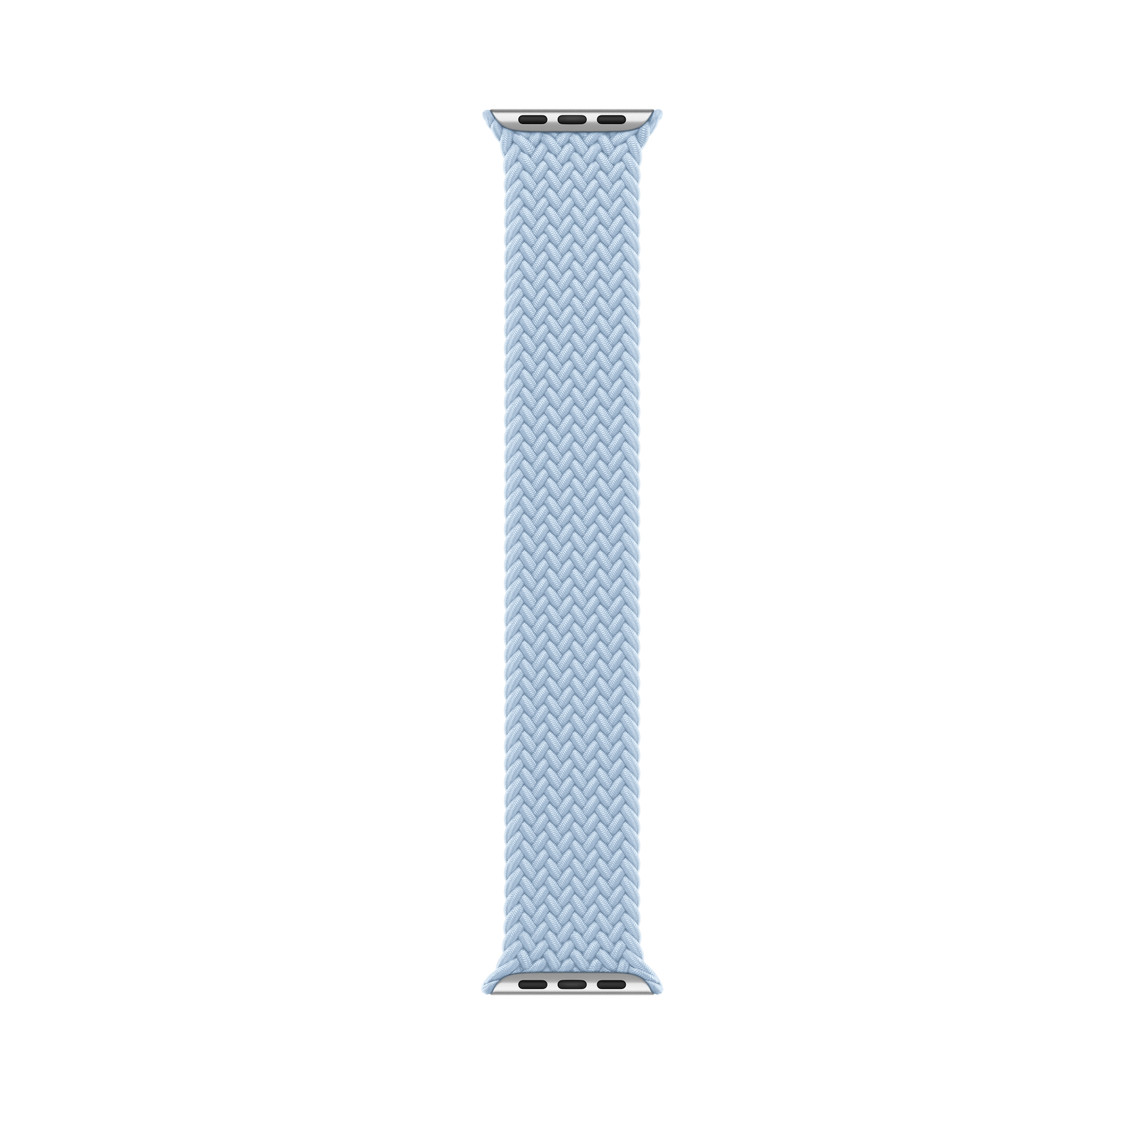 Light Blue Braided Solo Loop band, woven polyester and silicone threads with no clasps or buckles